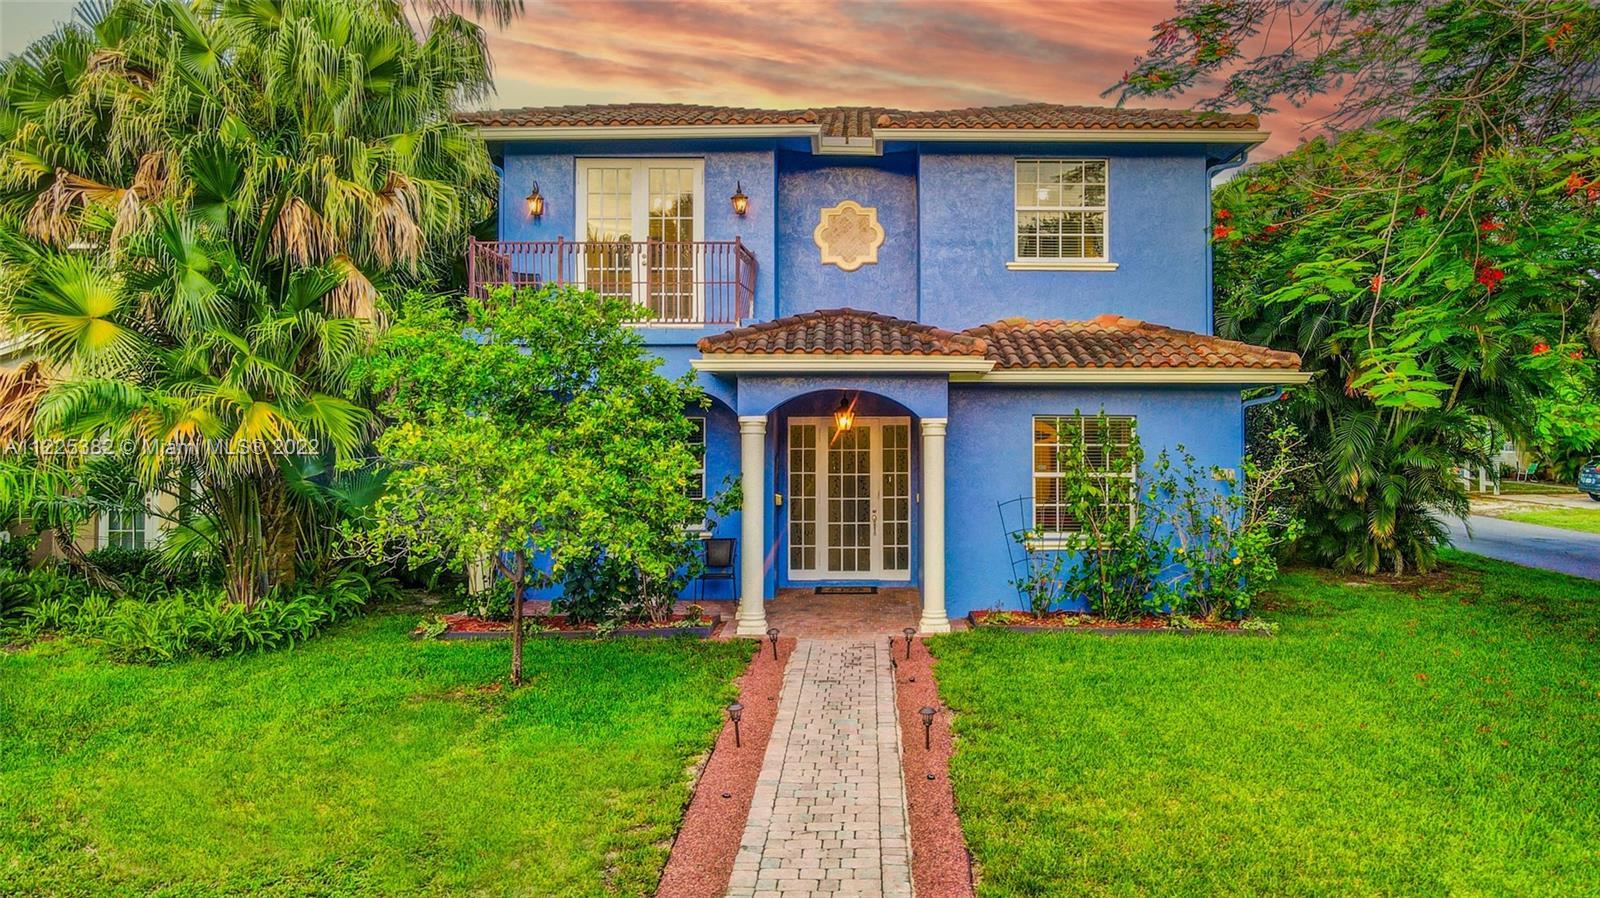 Located in the Fort Lauderdale’s prized neighborhood Victoria Park, this home is conveniently locate